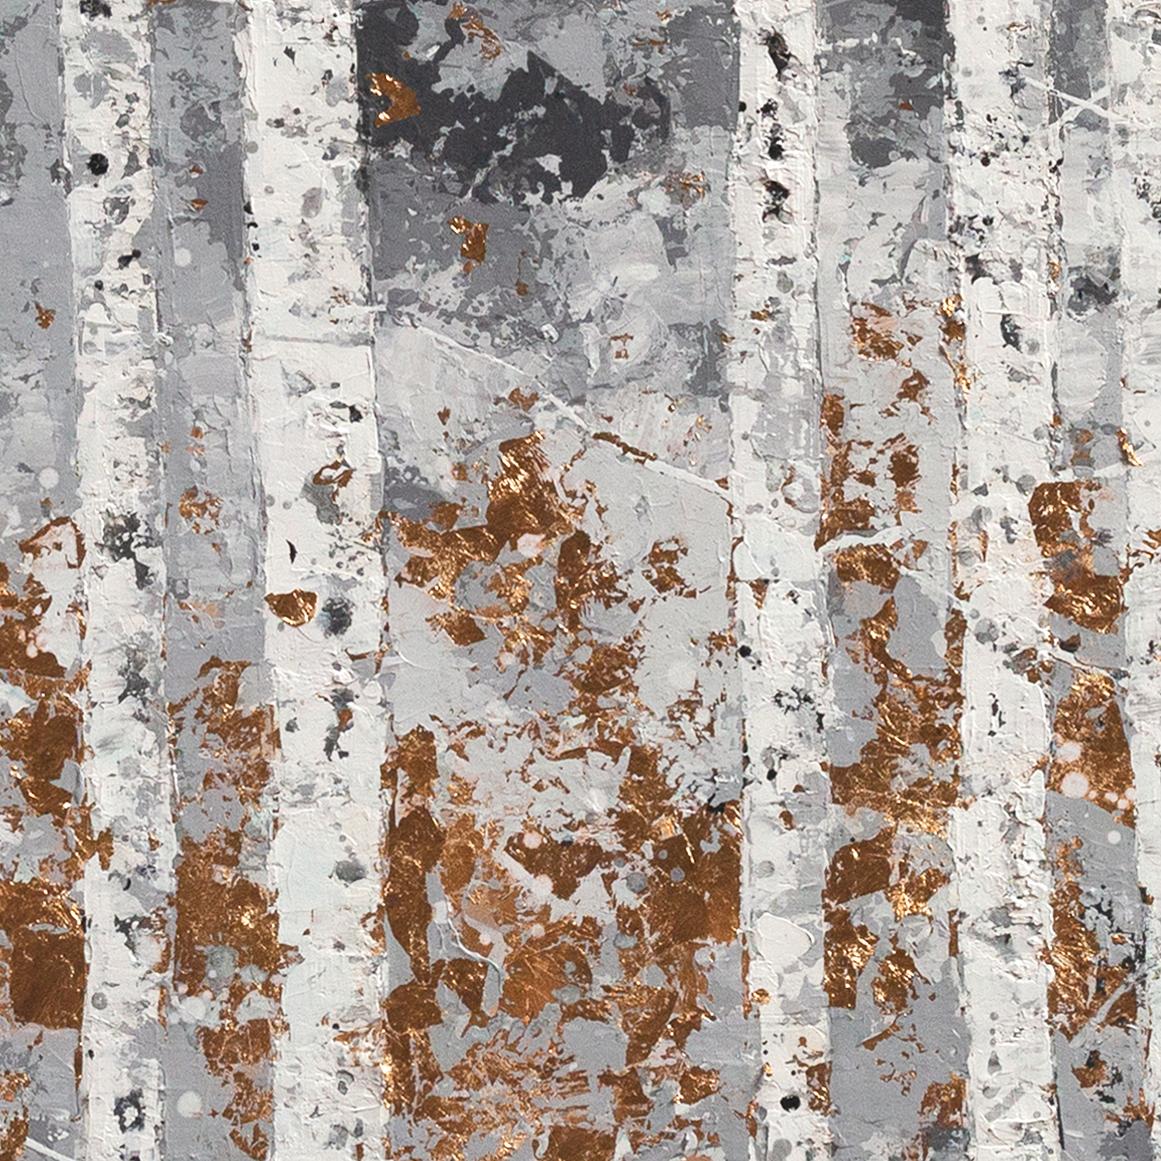 El Bosque Nevado - 21st Century, Contemporary, Abstract Painting, Gold, Forest 4